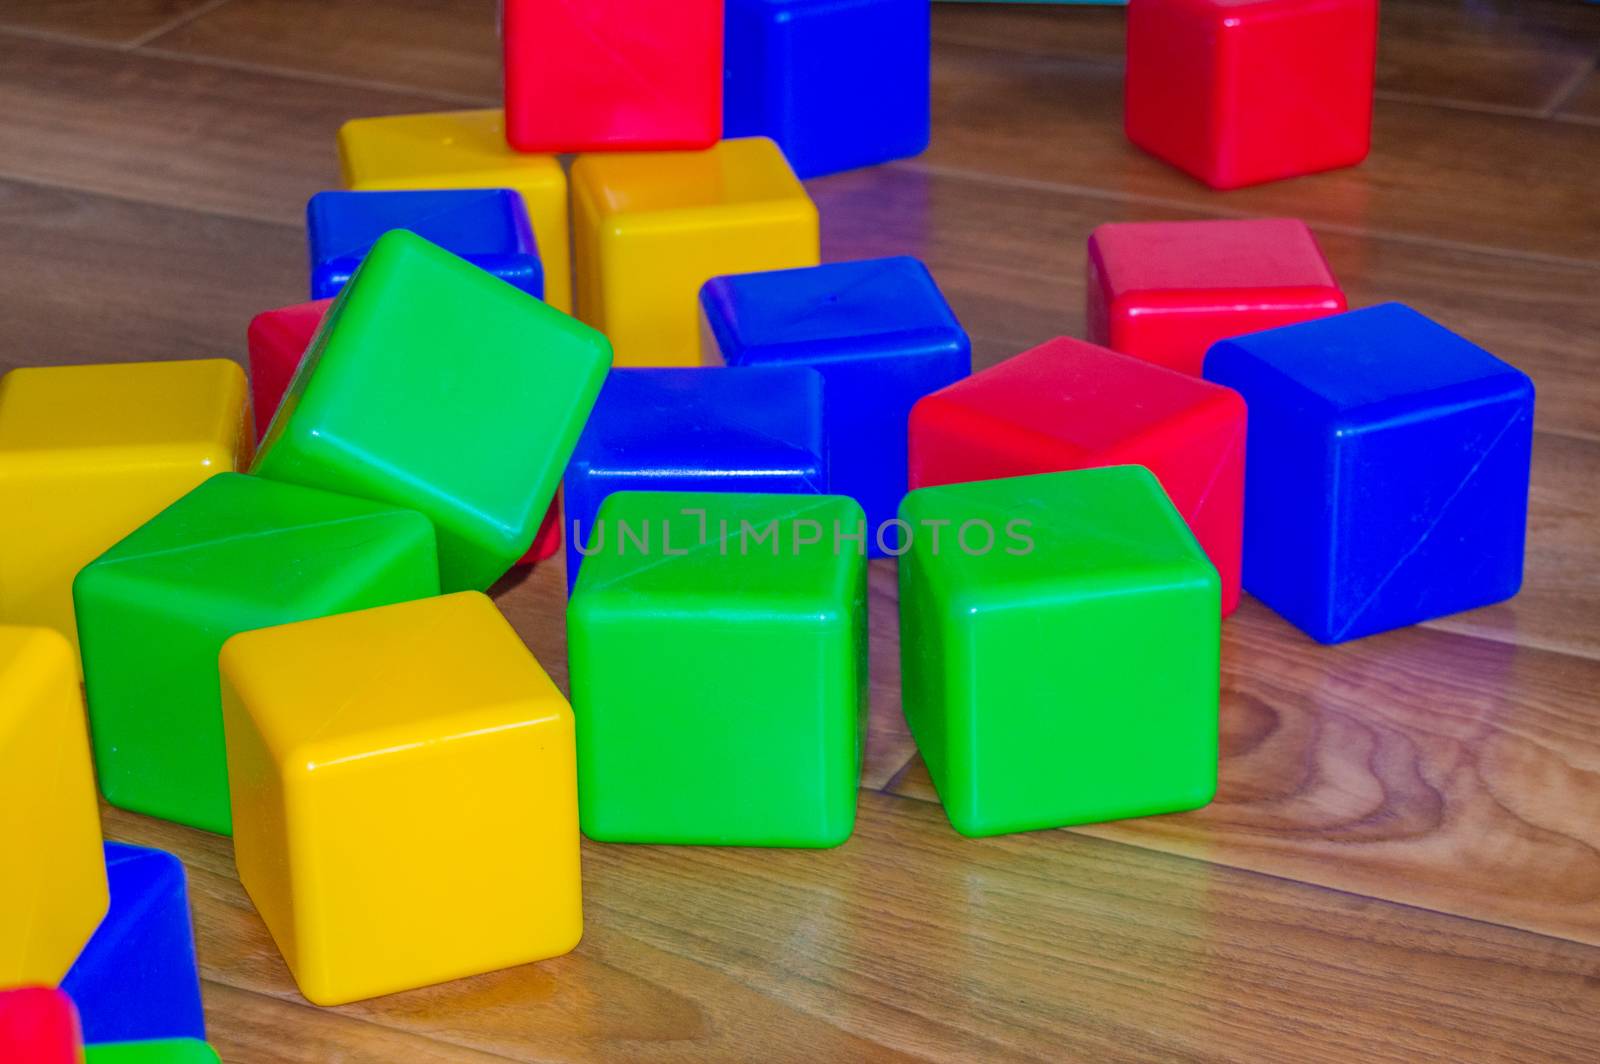 Colorful plastic cubes for children's games are scattered on the wooden floor.